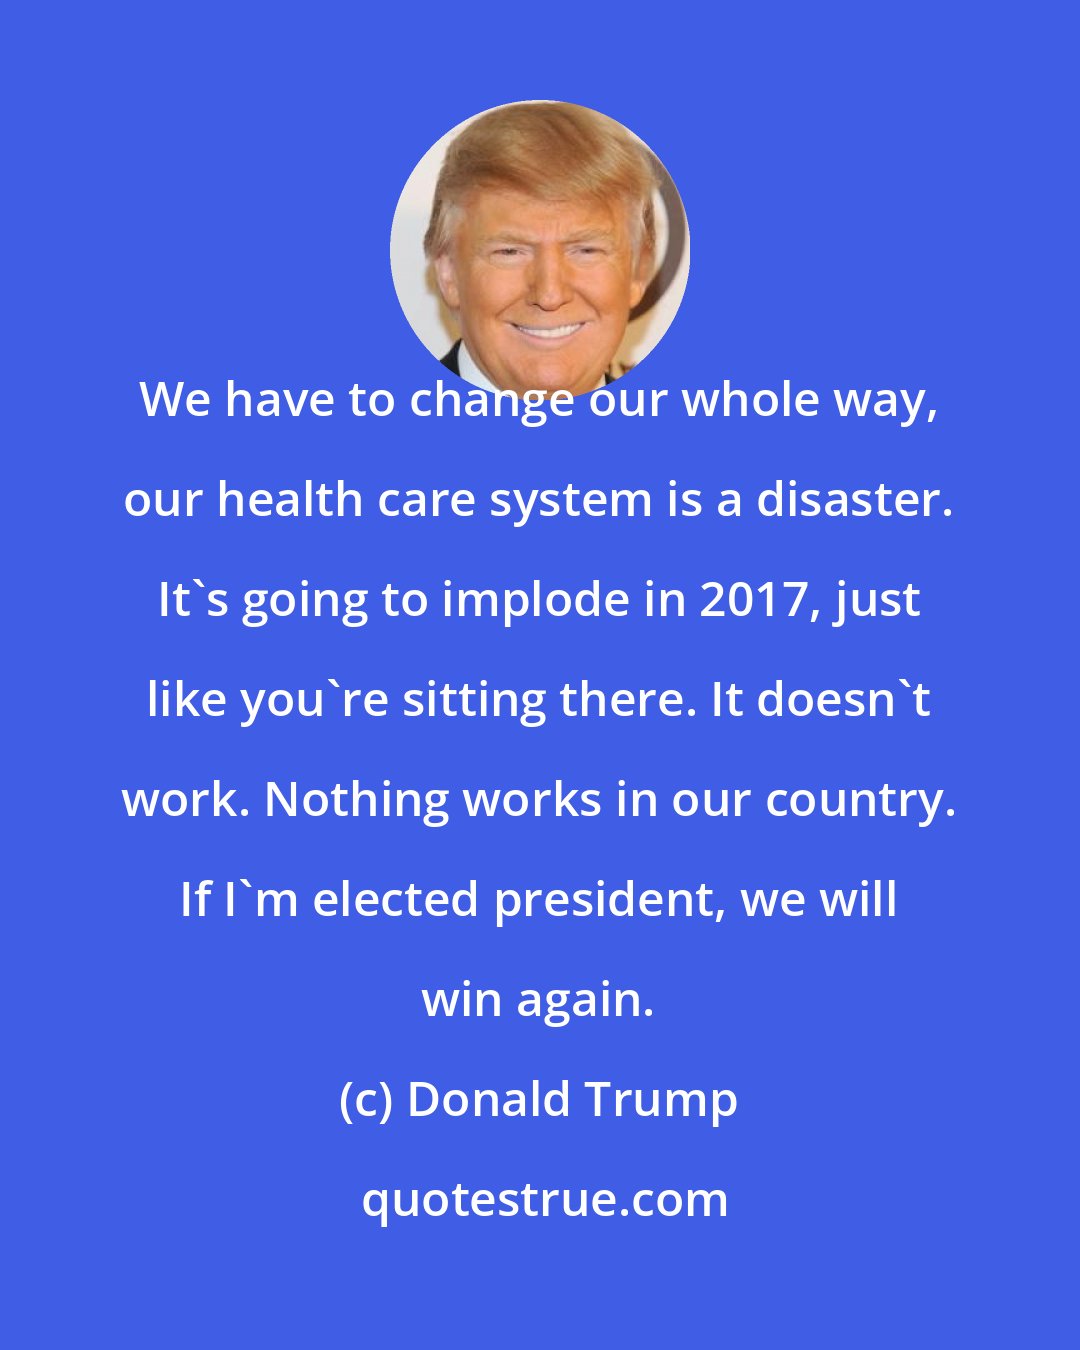 Donald Trump: We have to change our whole way, our health care system is a disaster. It's going to implode in 2017, just like you're sitting there. It doesn't work. Nothing works in our country. If I'm elected president, we will win again.